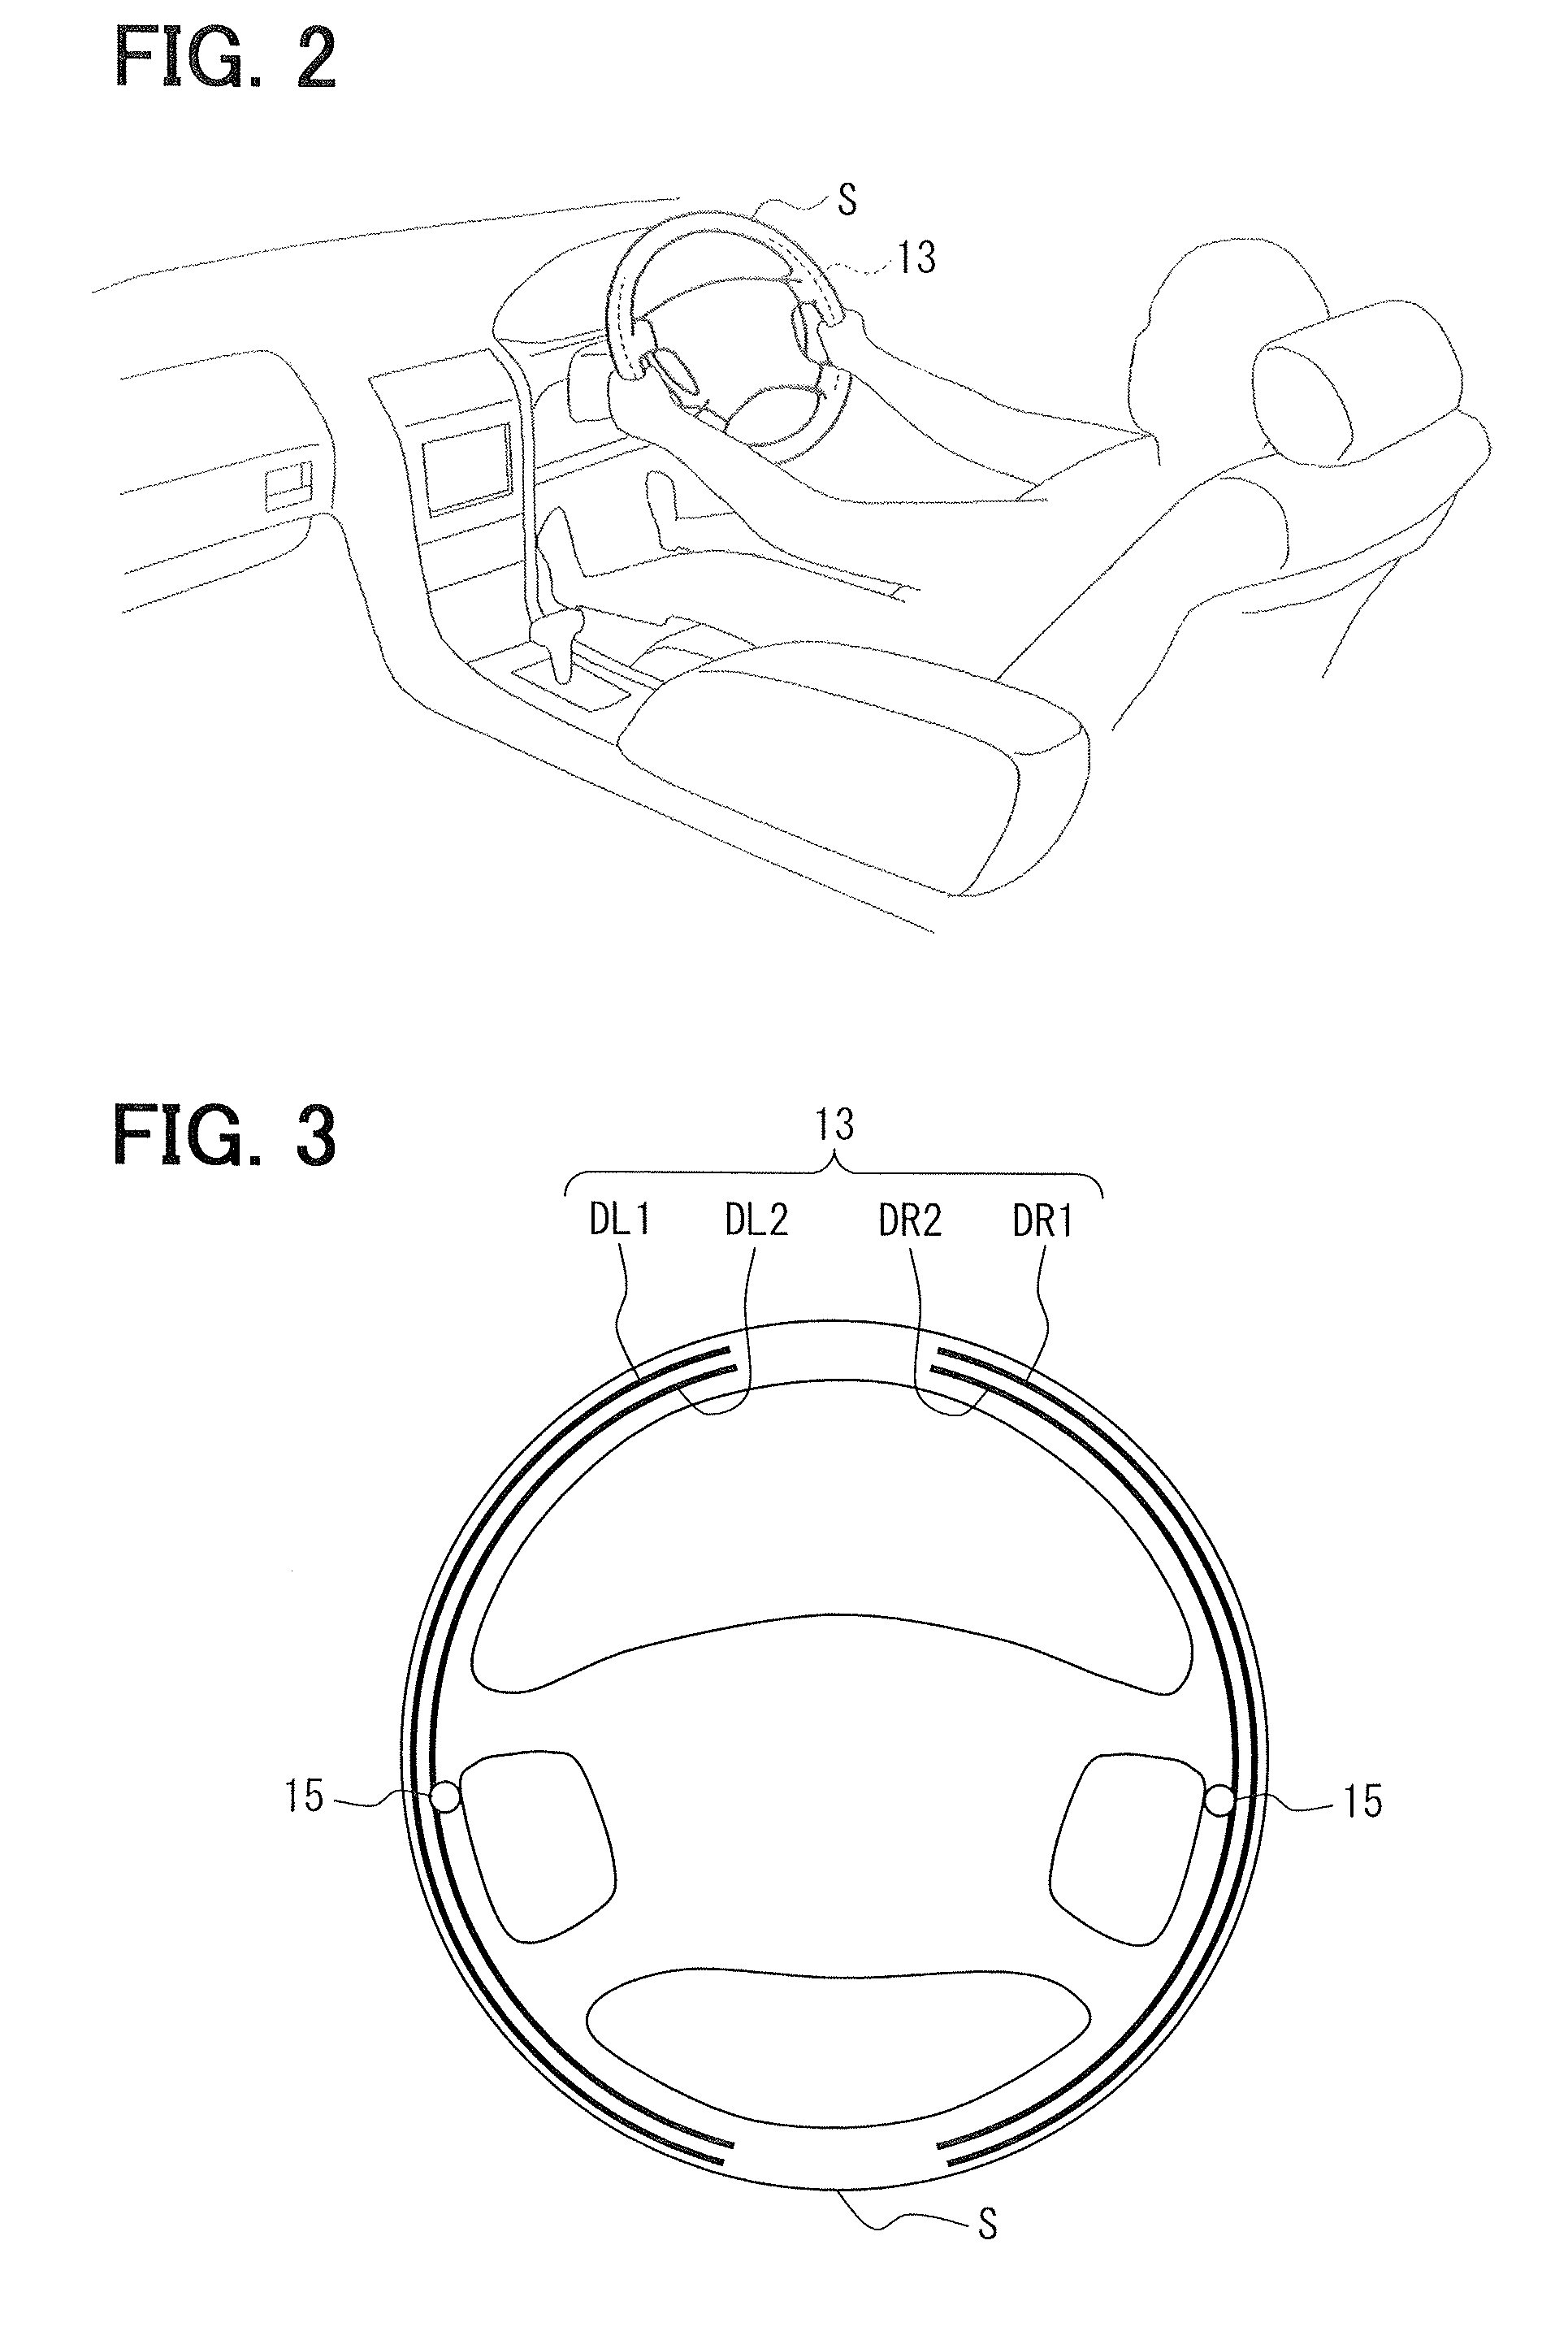 Living body state monitor apparatus